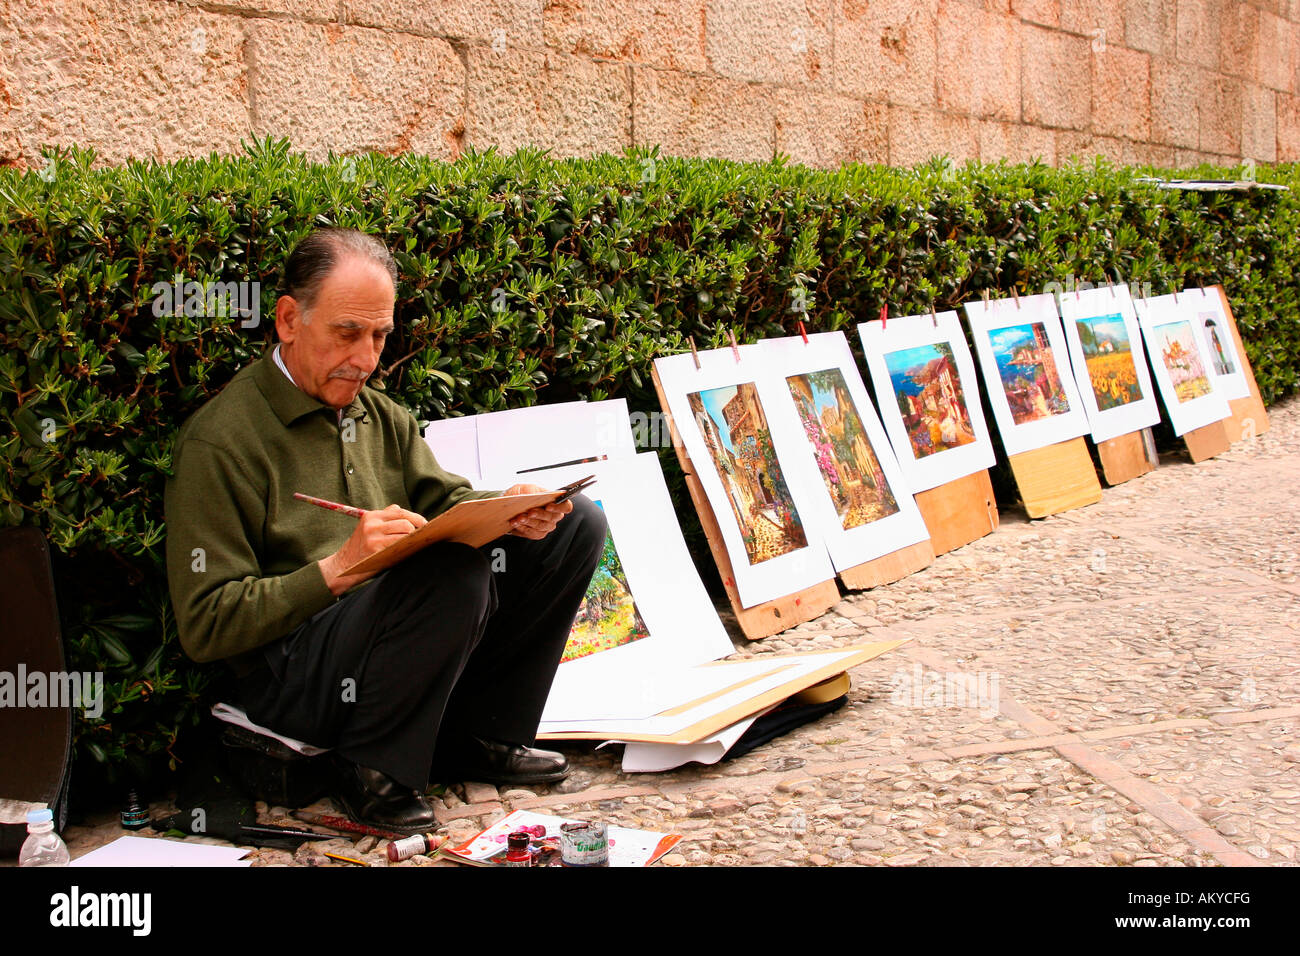 Artist with paintings displayed for sale in the old town of Palma de Mallorca, Majorca, Spain, Europe Stock Photo